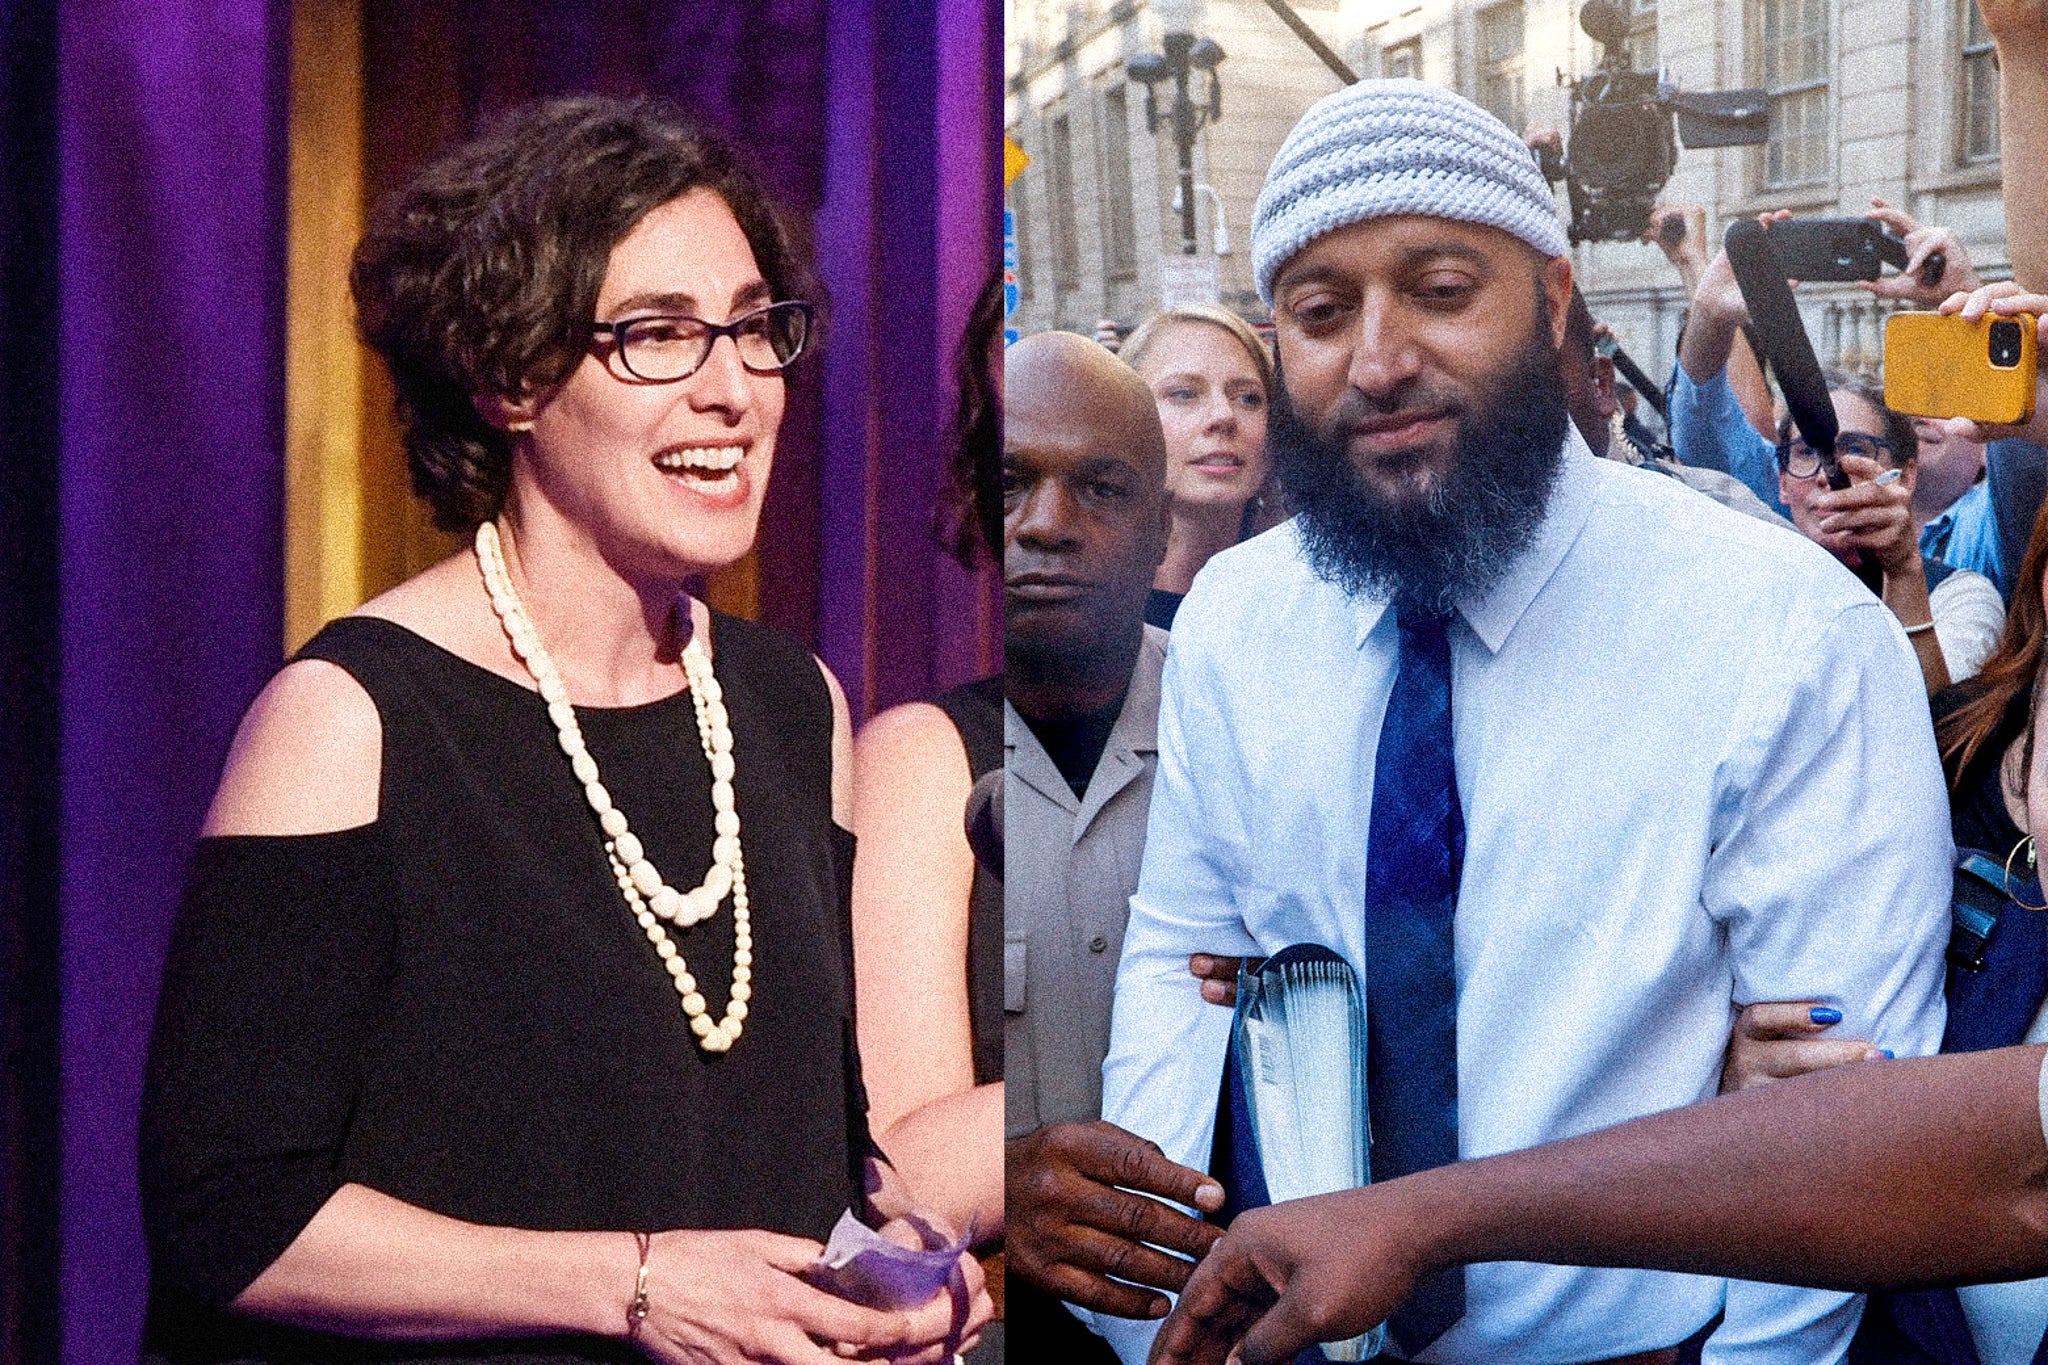 Left: A woman, Sarah Koenig, accepting an award. Right: A bearded man, Adnan Syed, talking to reporters.